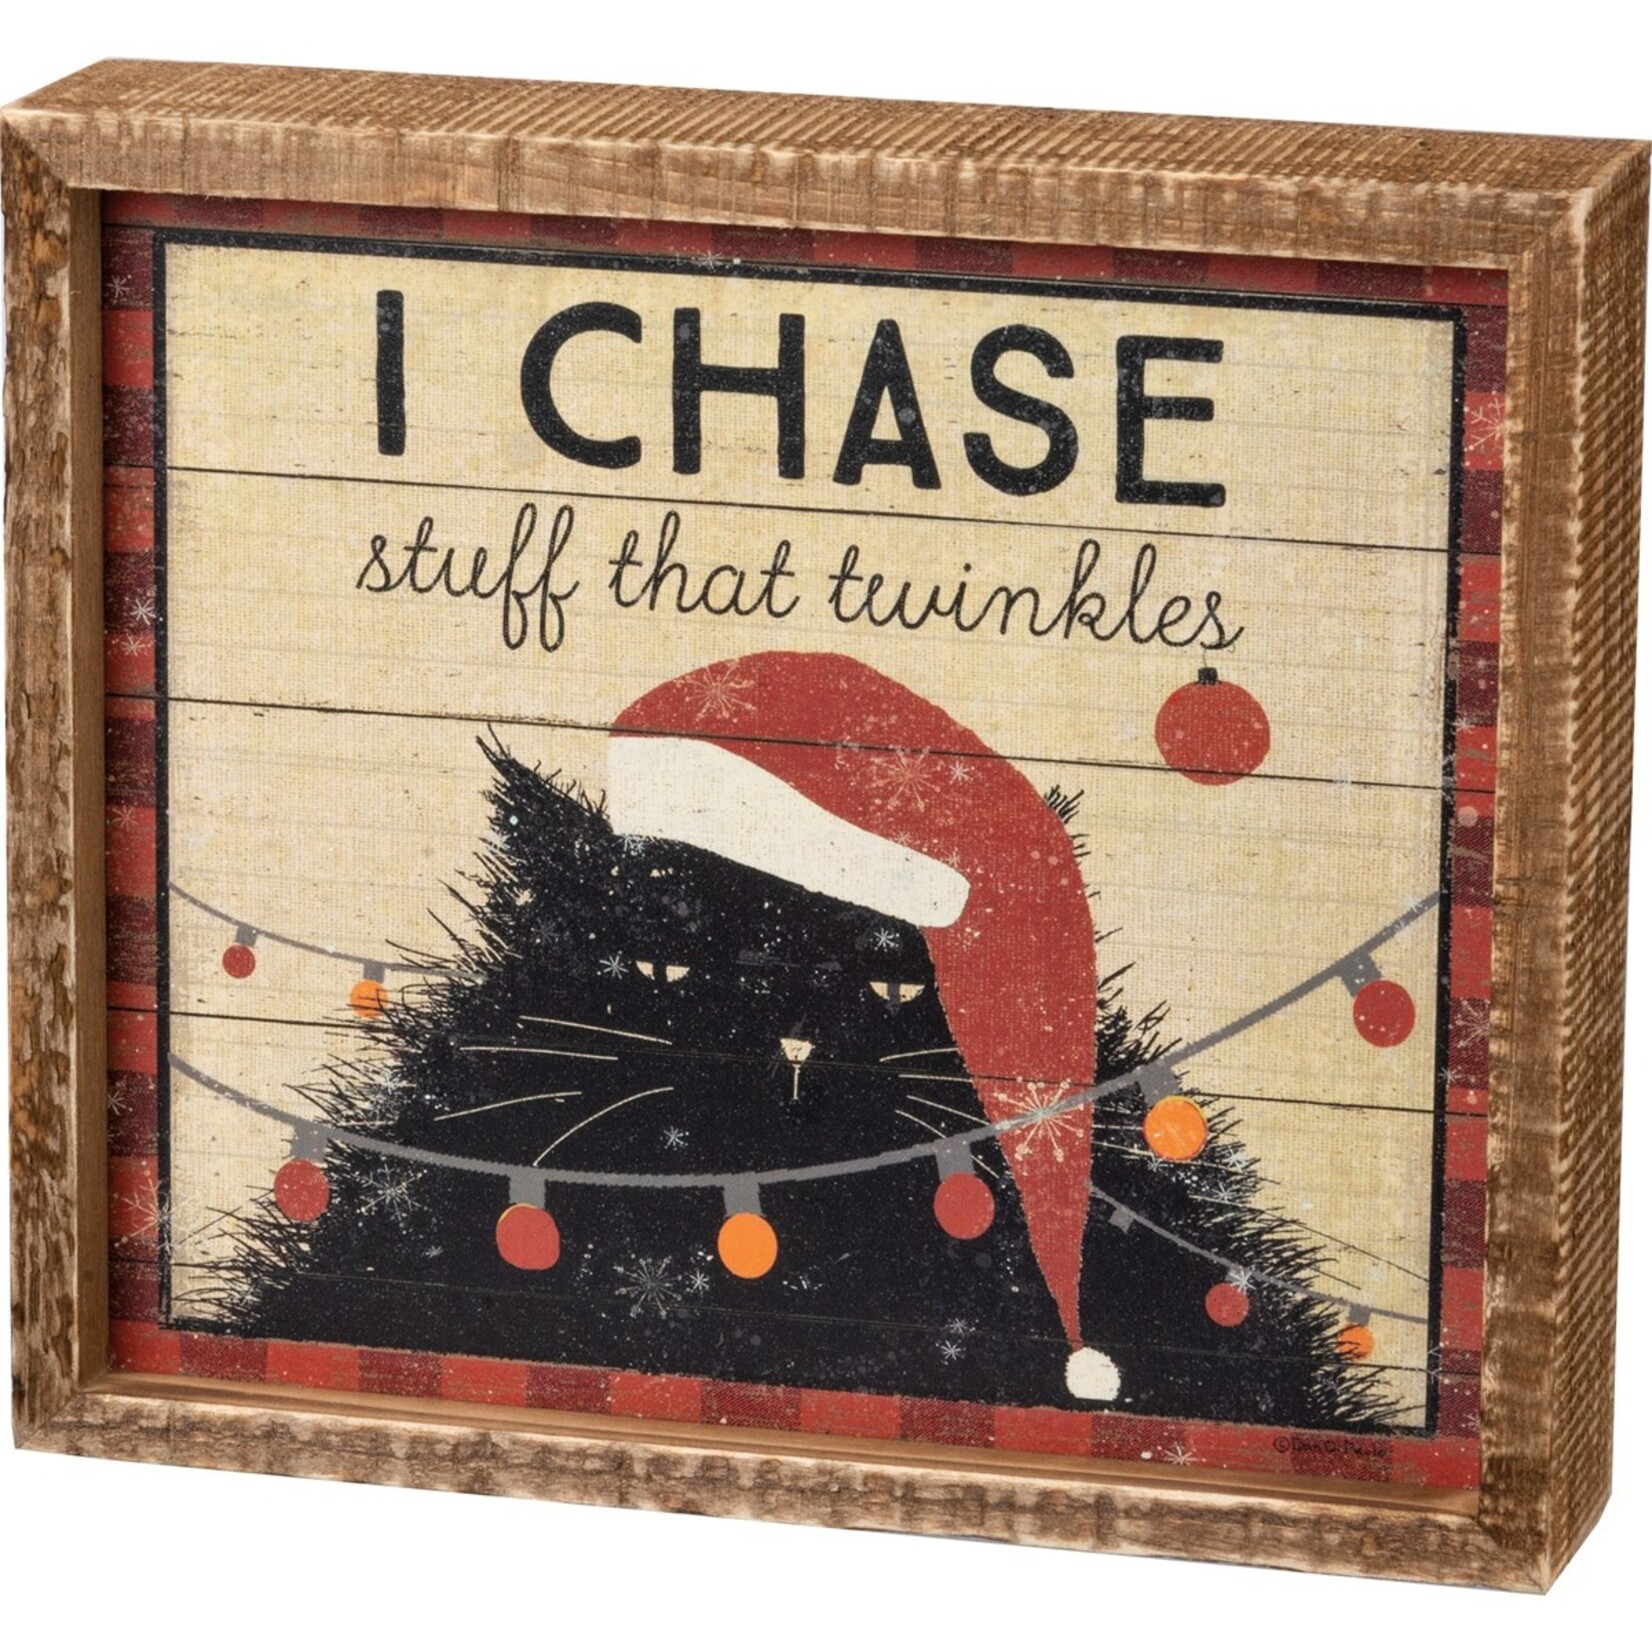 Primitives by Kathy Primitives by Kathy-I Chase Stuff That Twinkles Inset Box Sign